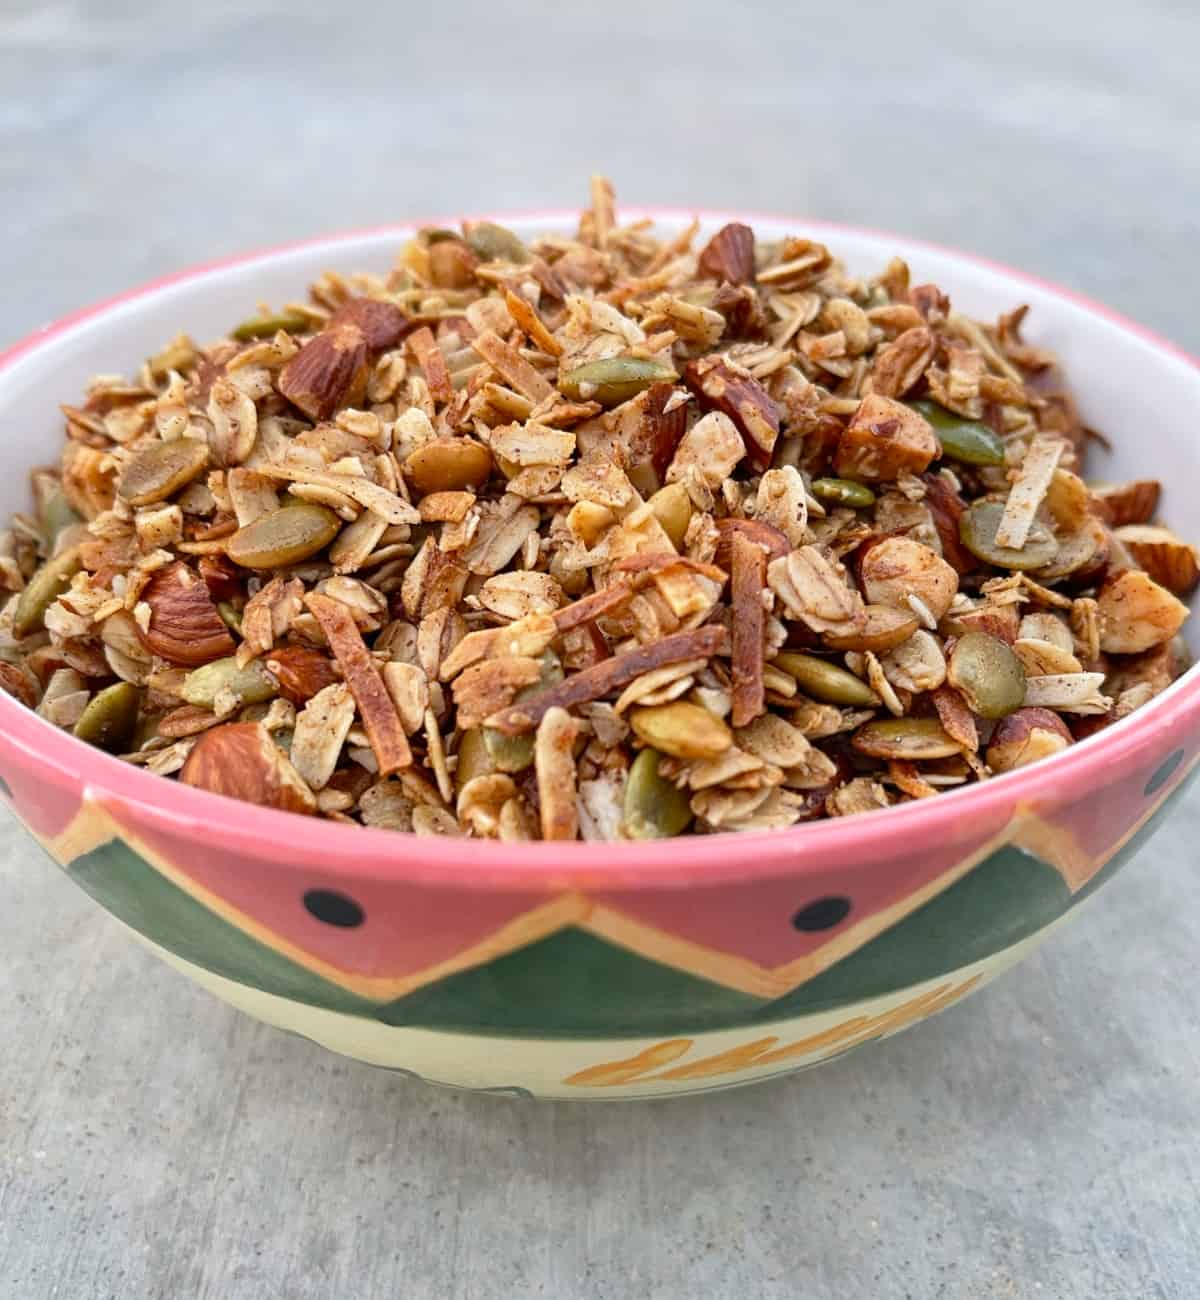 Crunchy air fryer toasted oat granola in colorful hand-painted bowl.